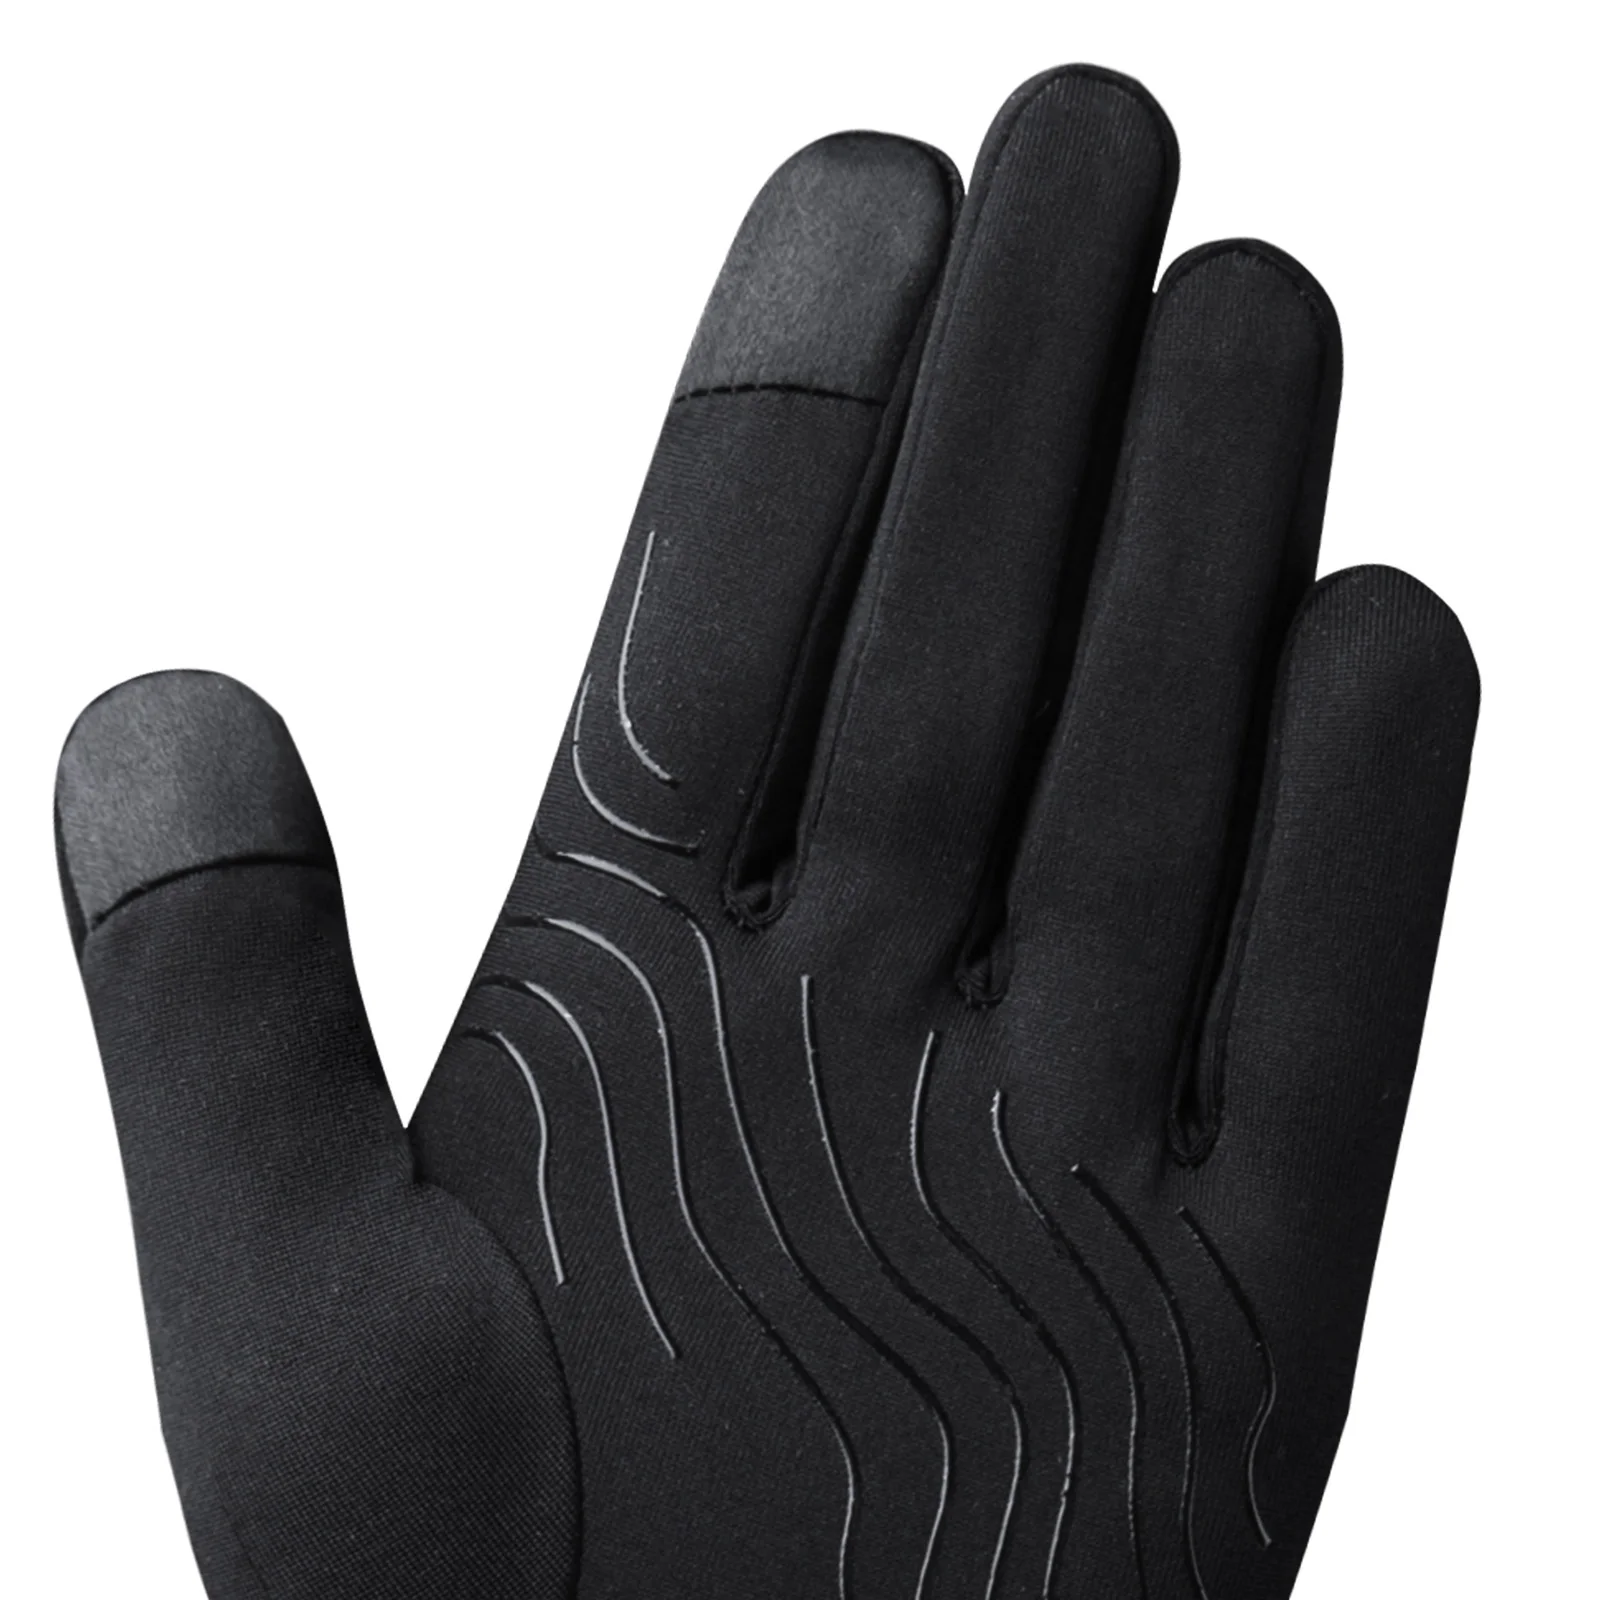 AONIJIE M56 Breathable Full Finger Anti Slip Sports Gloves Two Finger Touchscreen Wrist Extension Protection For Cycling Running